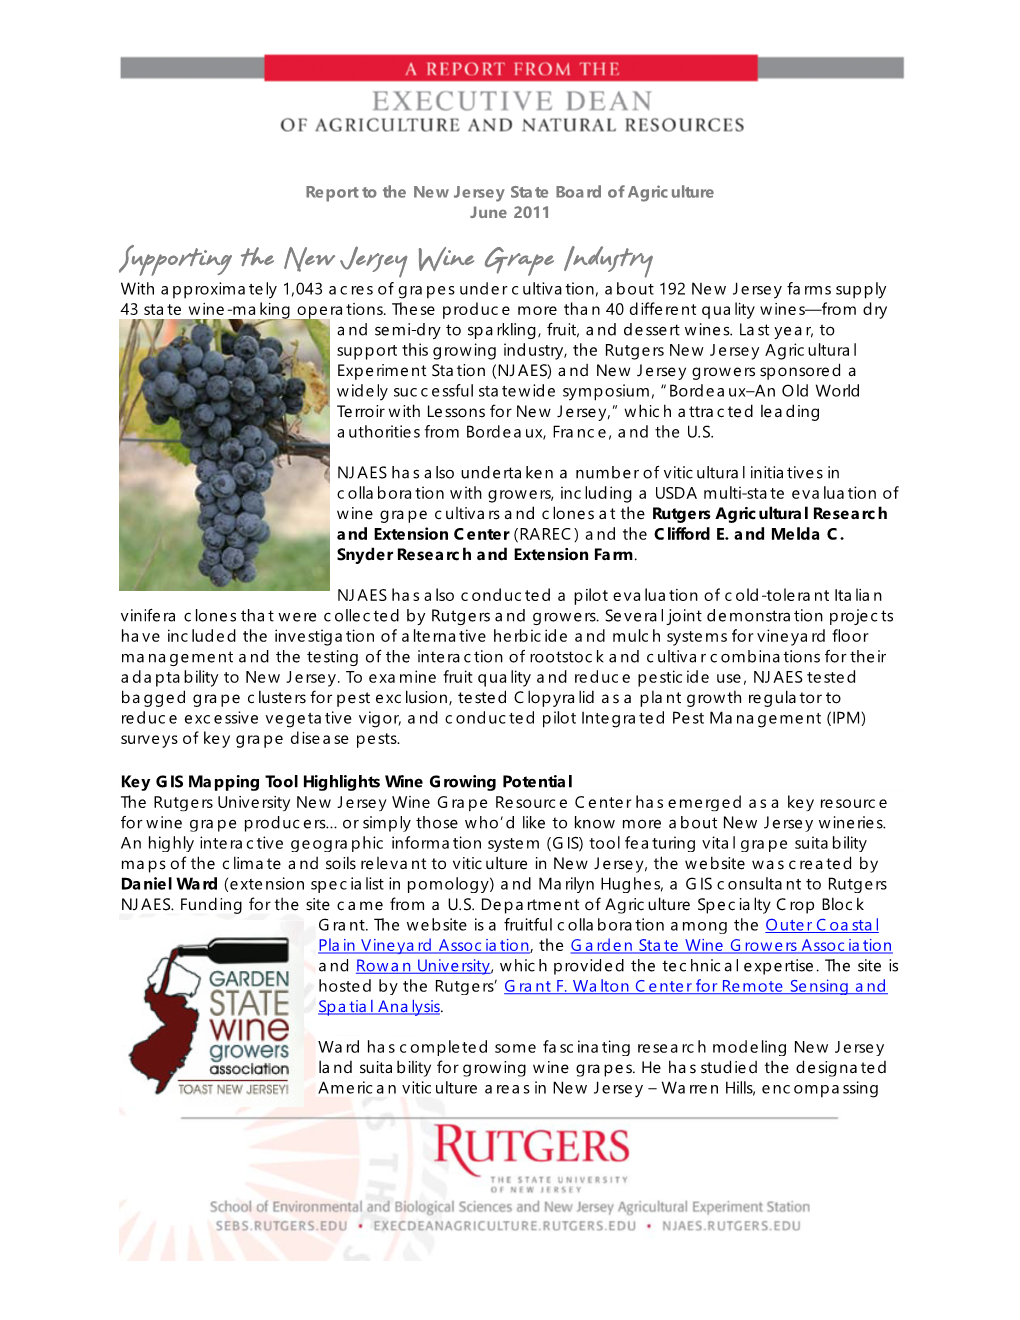 Supporting the New Jersey Wine Grape Industry